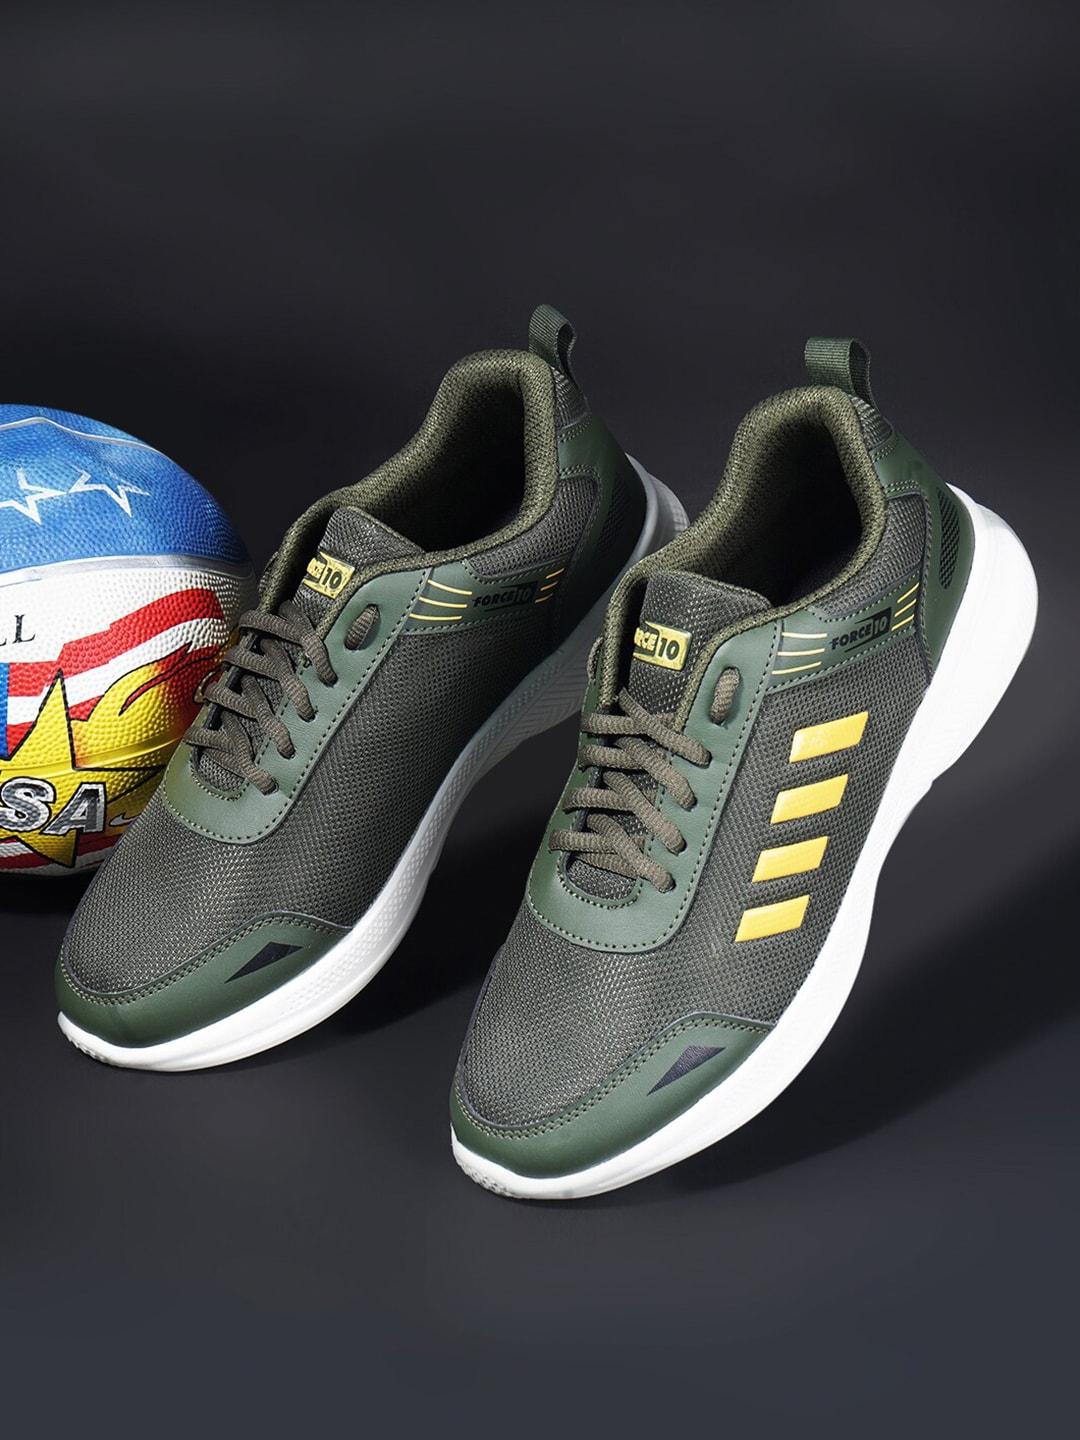 liberty-men-lace-up-running-shoes